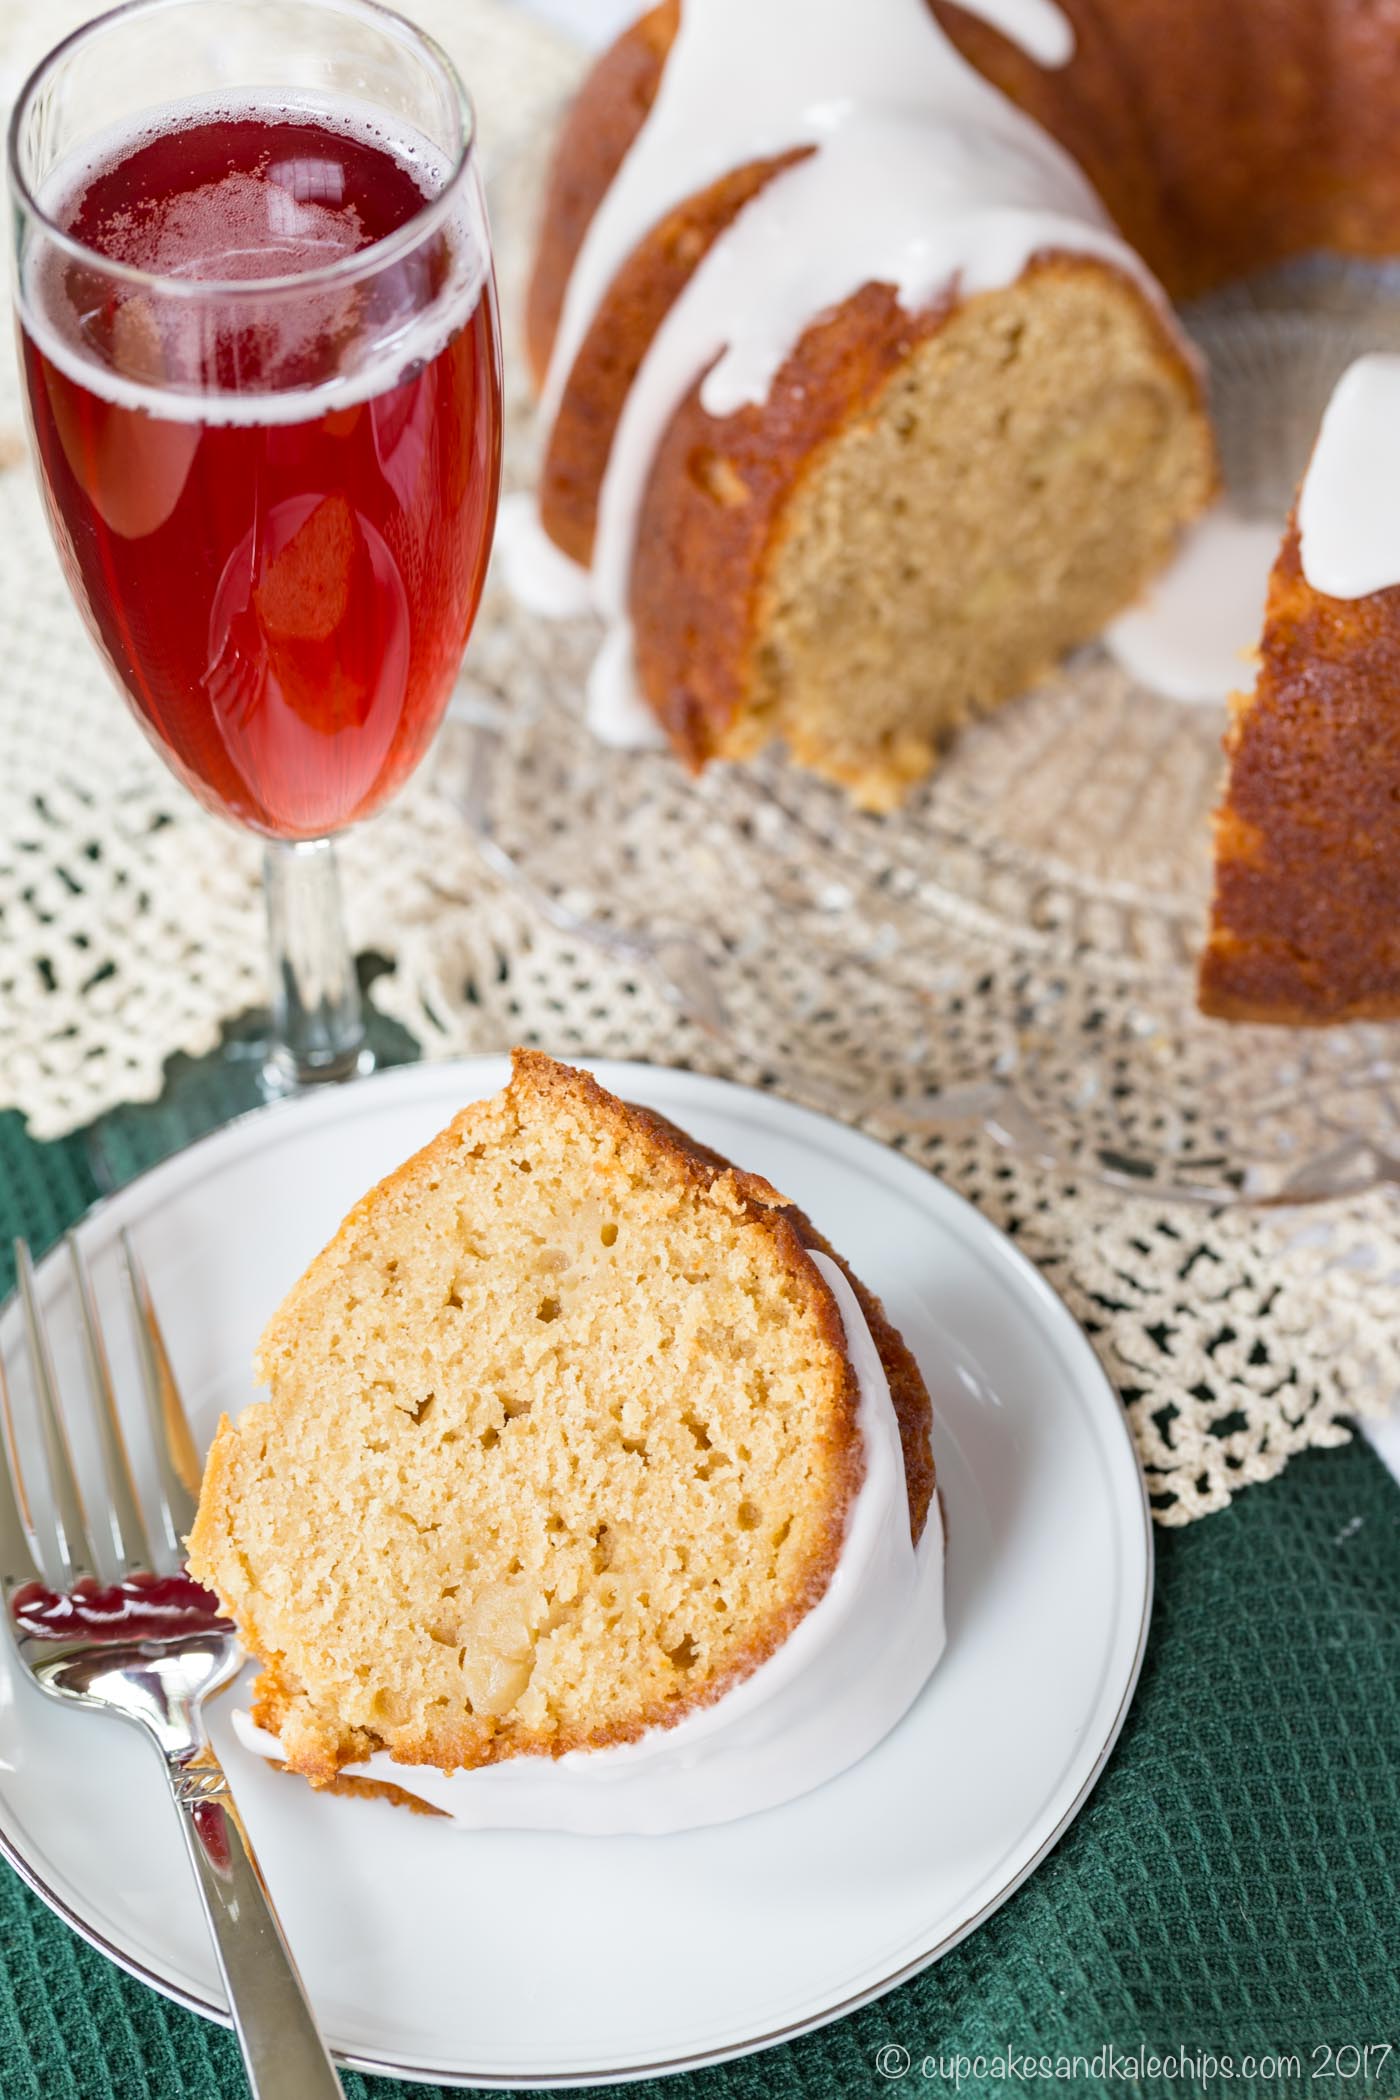 A slice of gluten-free apple cranberry donut cake on a plate next to a fork and a flute glass of Martinelli's sparkling cider.